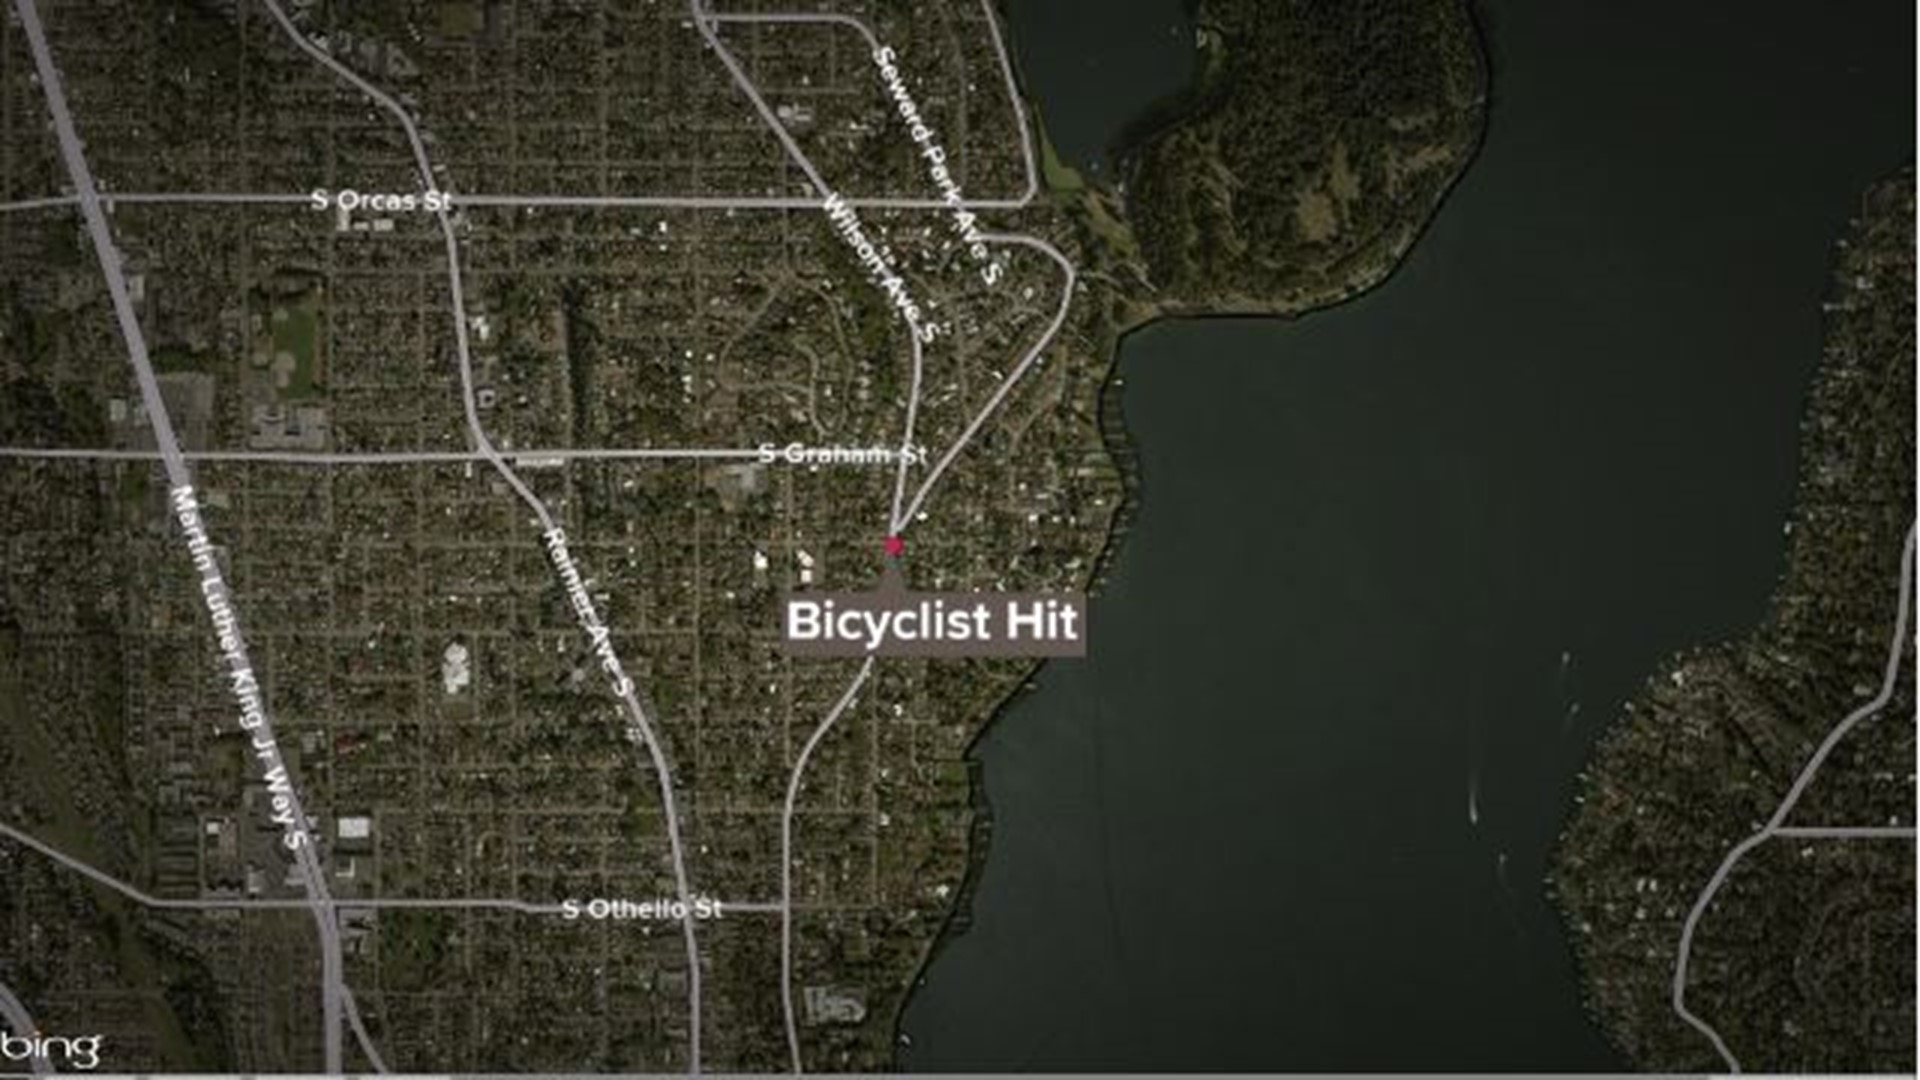 The driver hit and killed a 63 year old bicyclist Sunday night near Seward Park.  Witnesses describe the car as an older silver sedan with a cracked windshield.